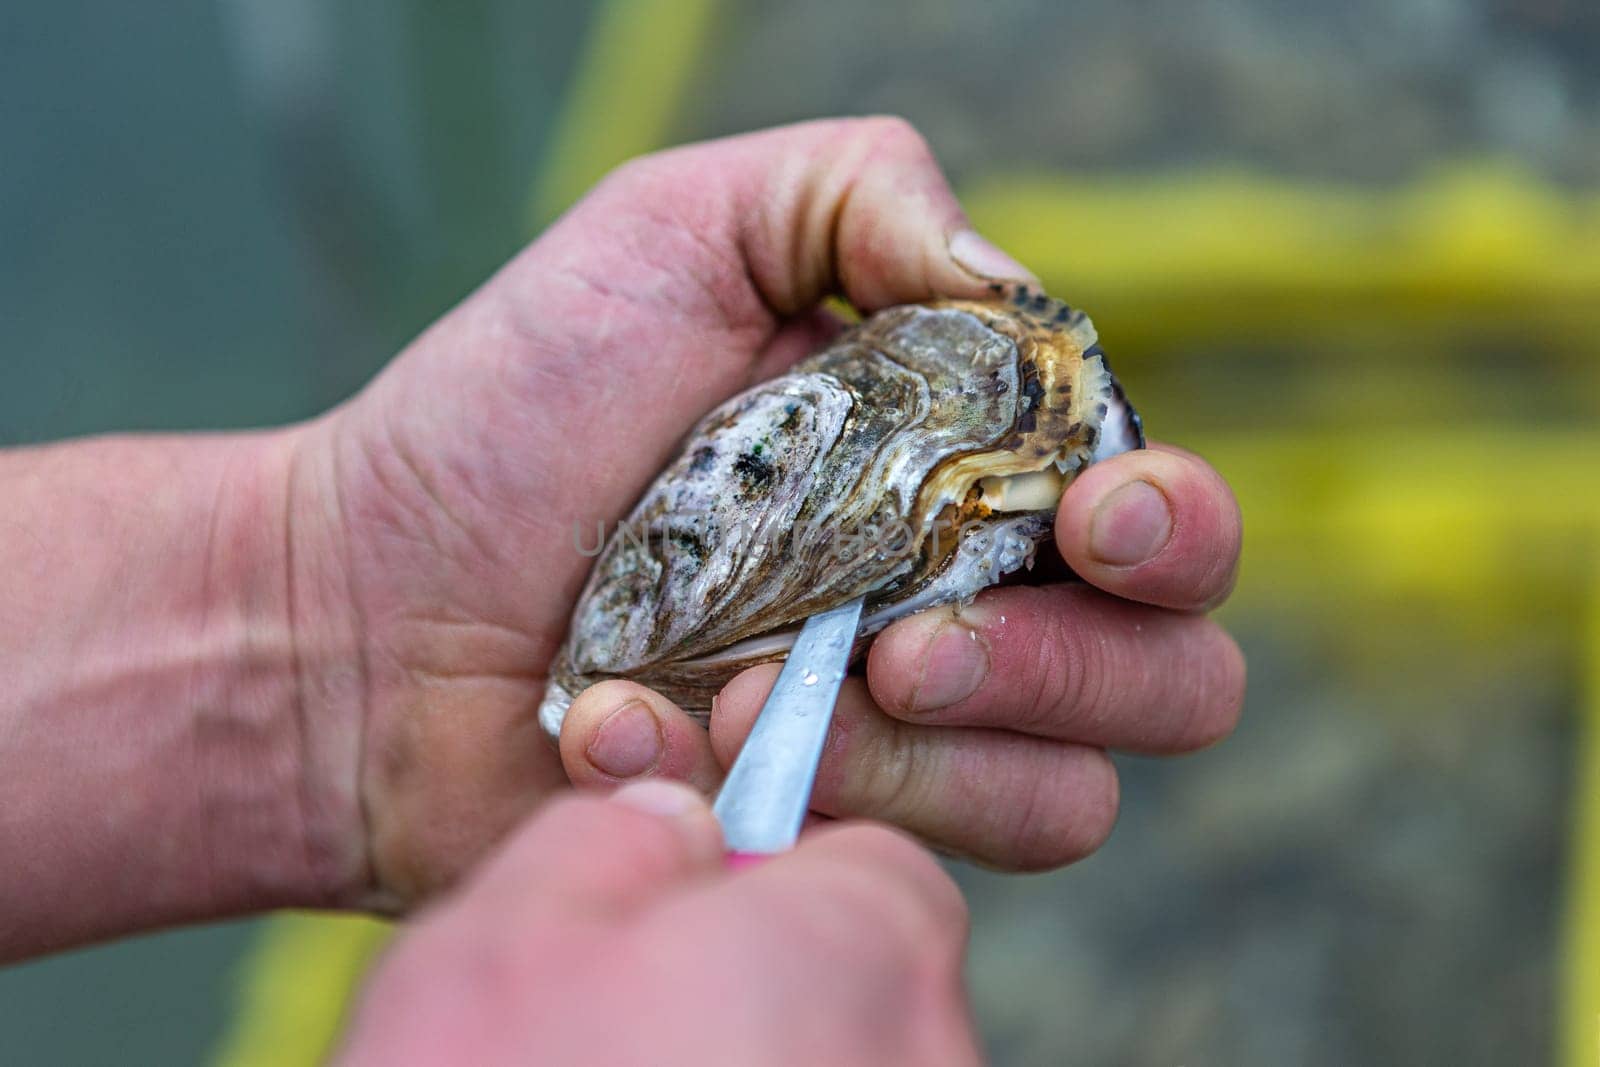 Someone shucking an oyster as water drips out of it. The oyster opening oyester farm in background by JPC-PROD